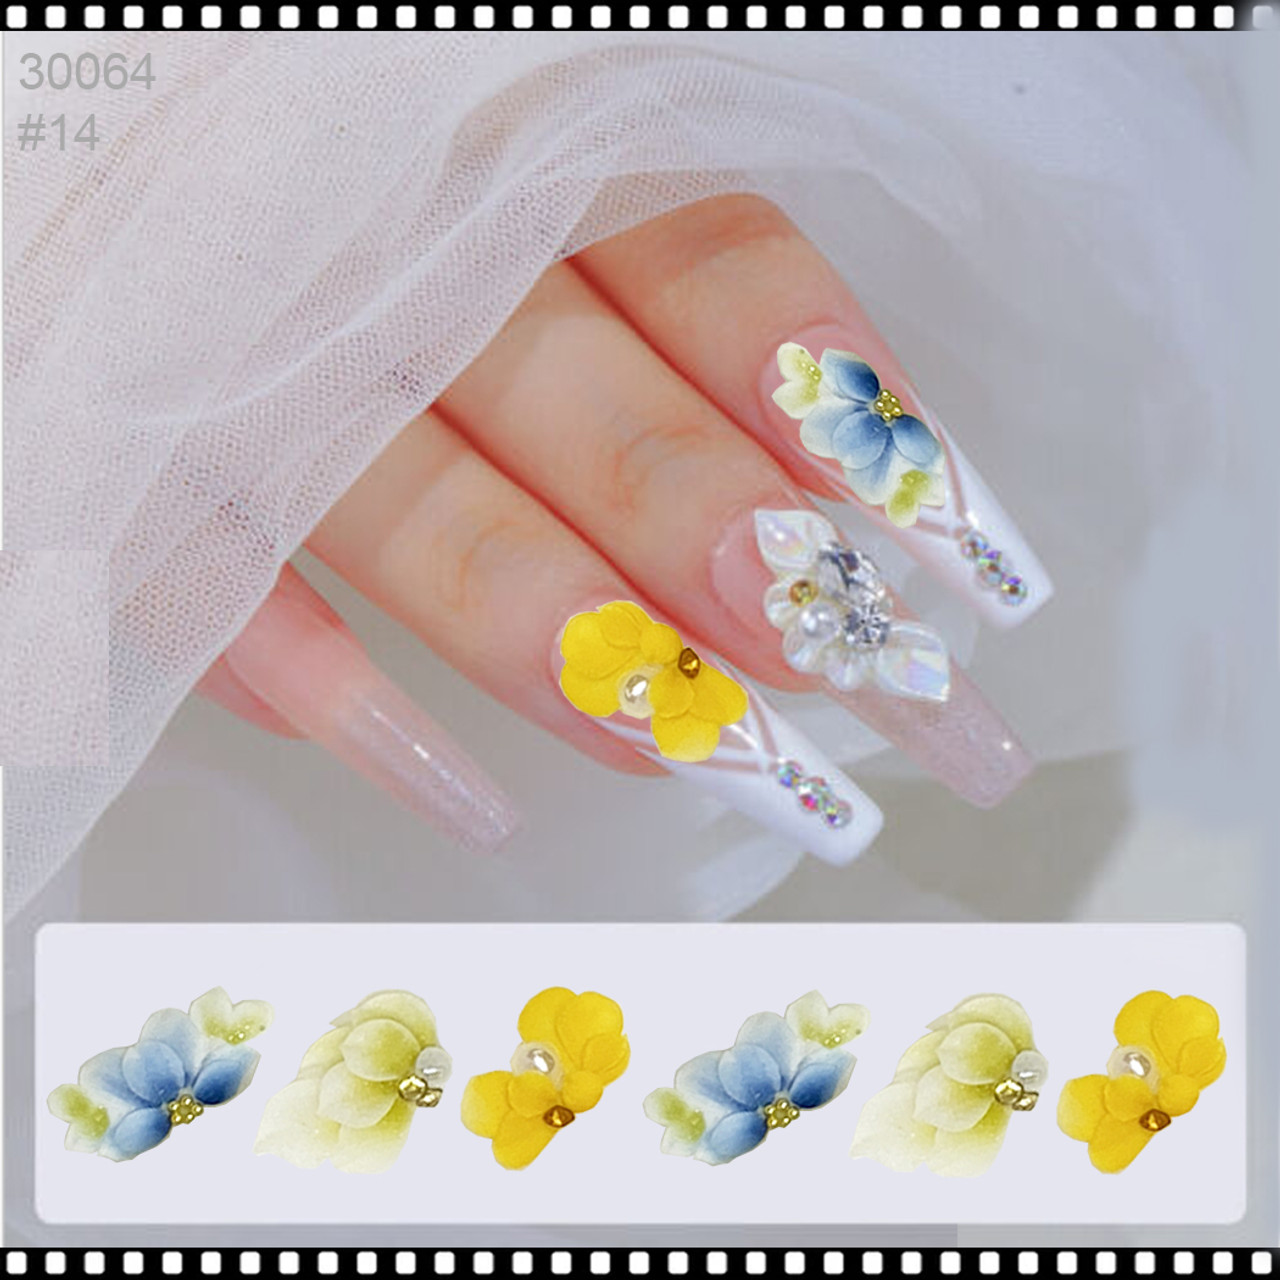 ROCK YOUR SUMMER WITH 3D MANICURE